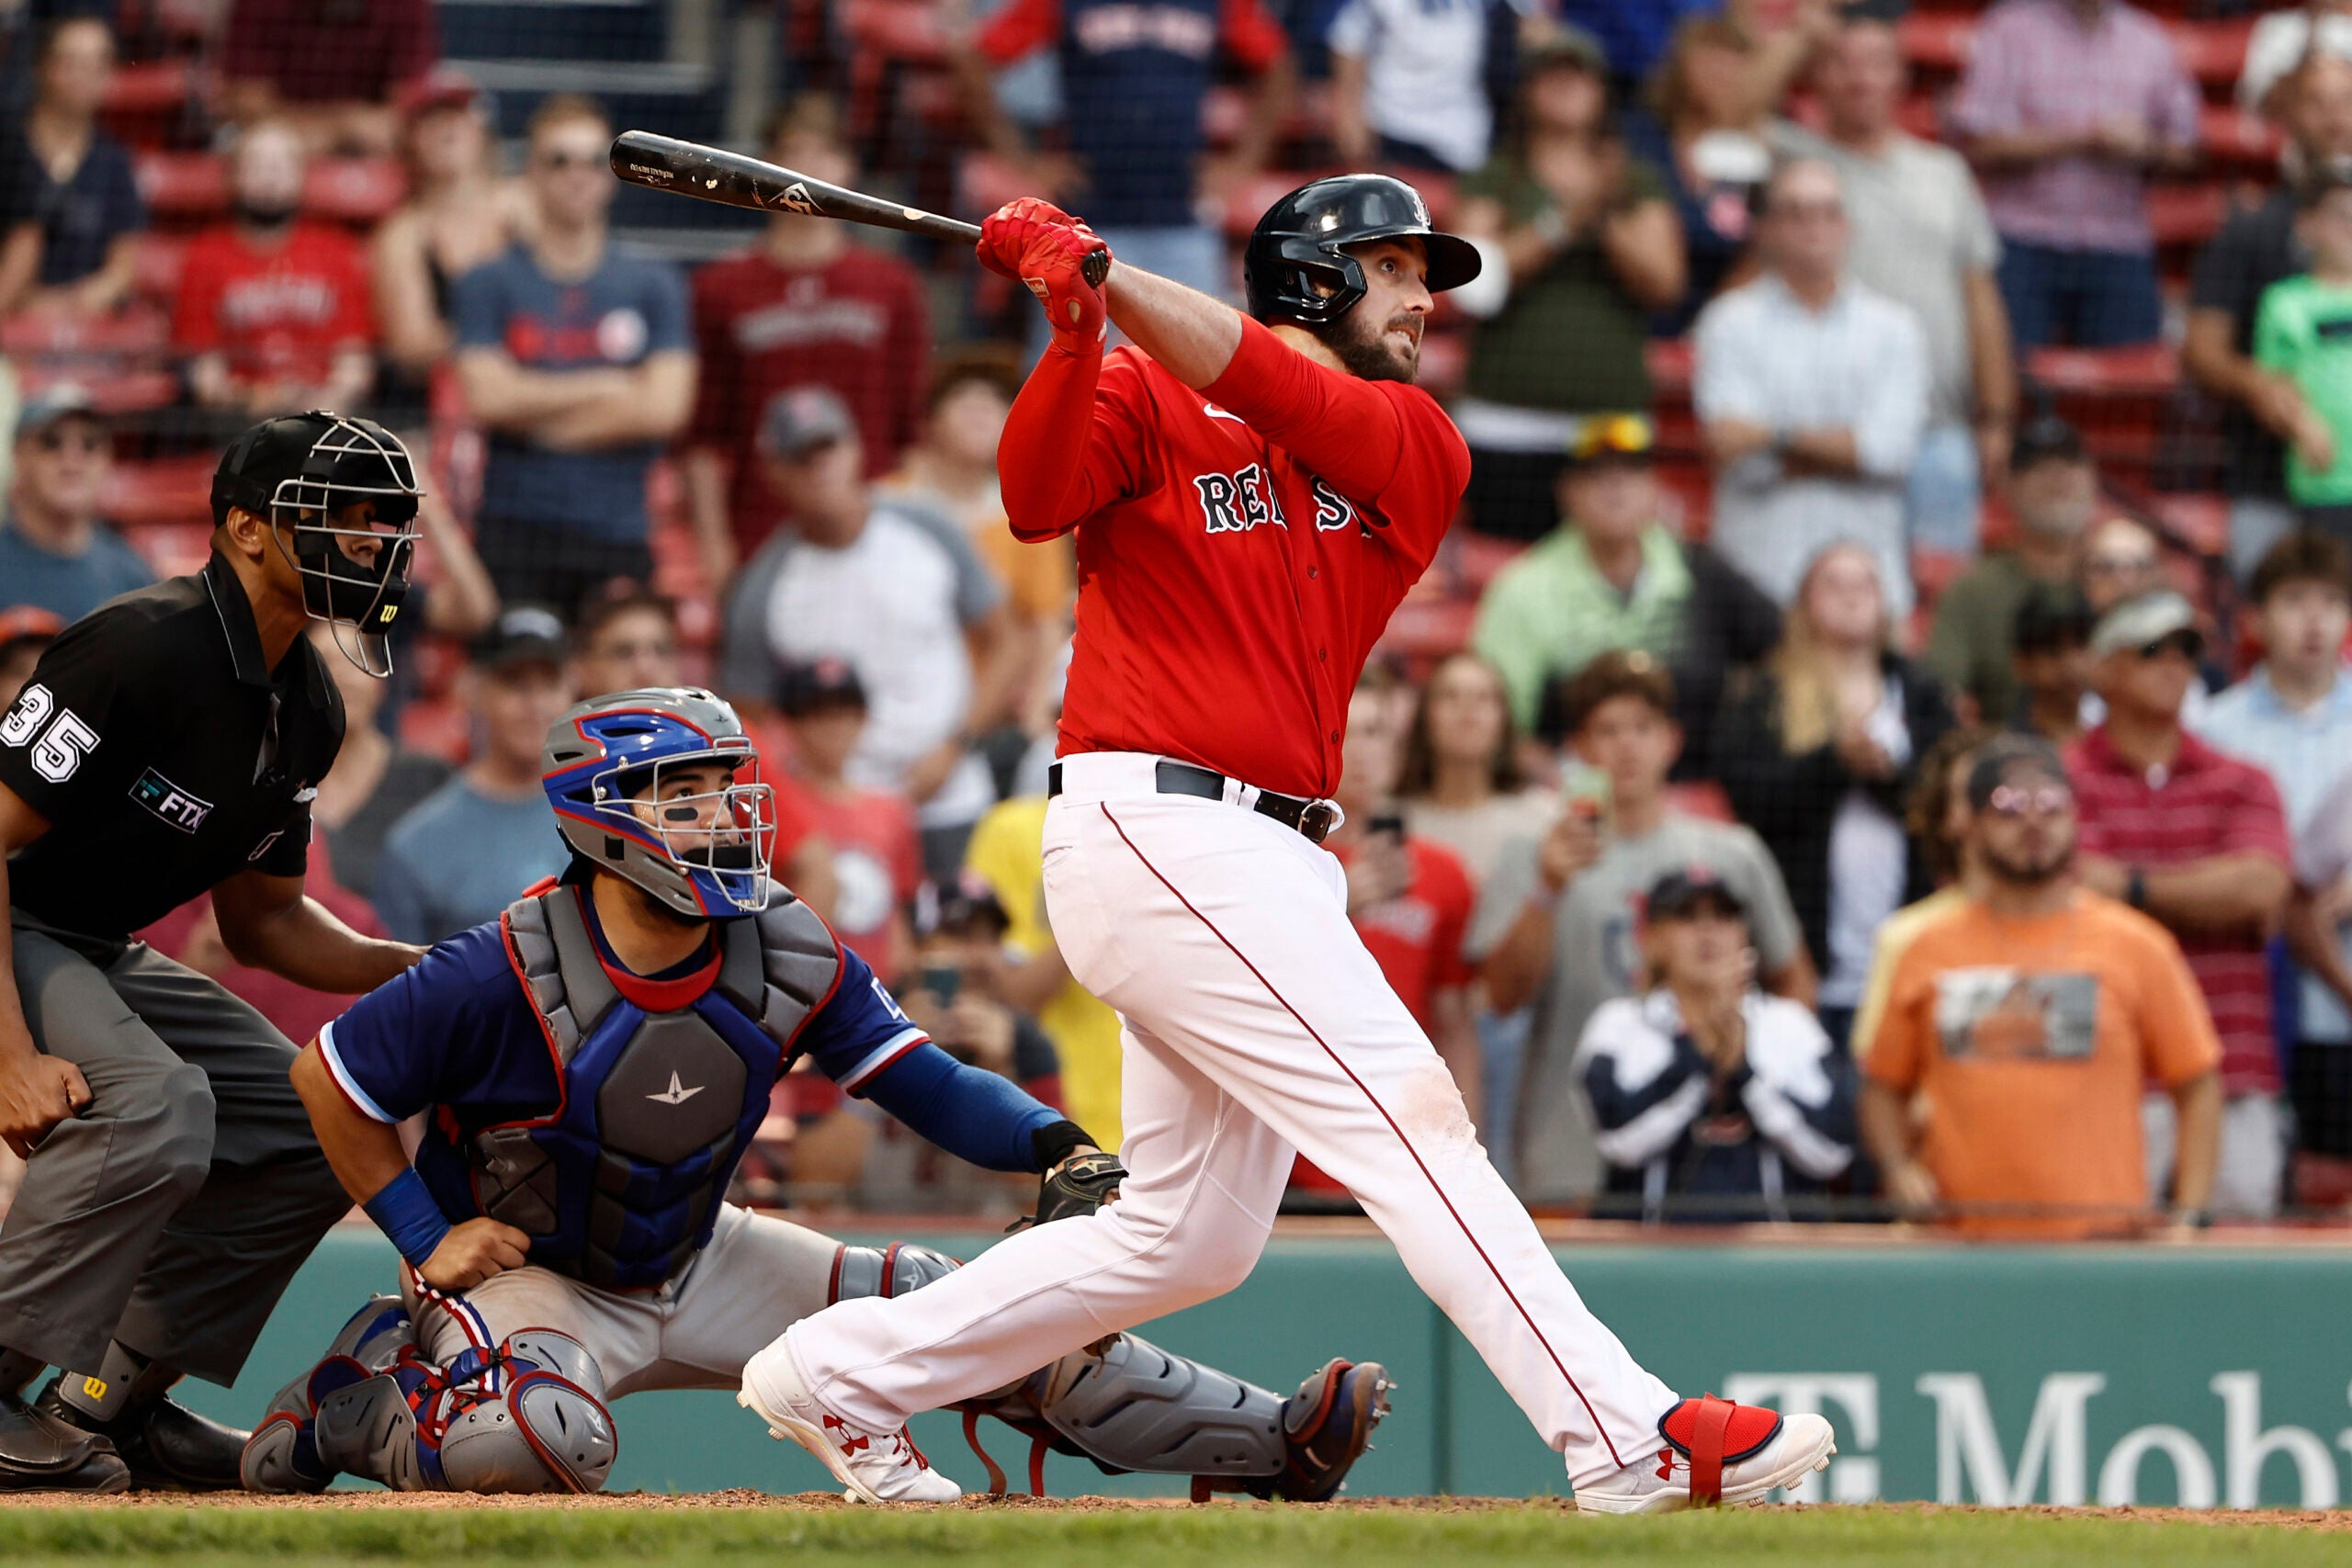 WATCH: Former Milwaukee Brewer Hits Grand Slam with Boston Red Sox